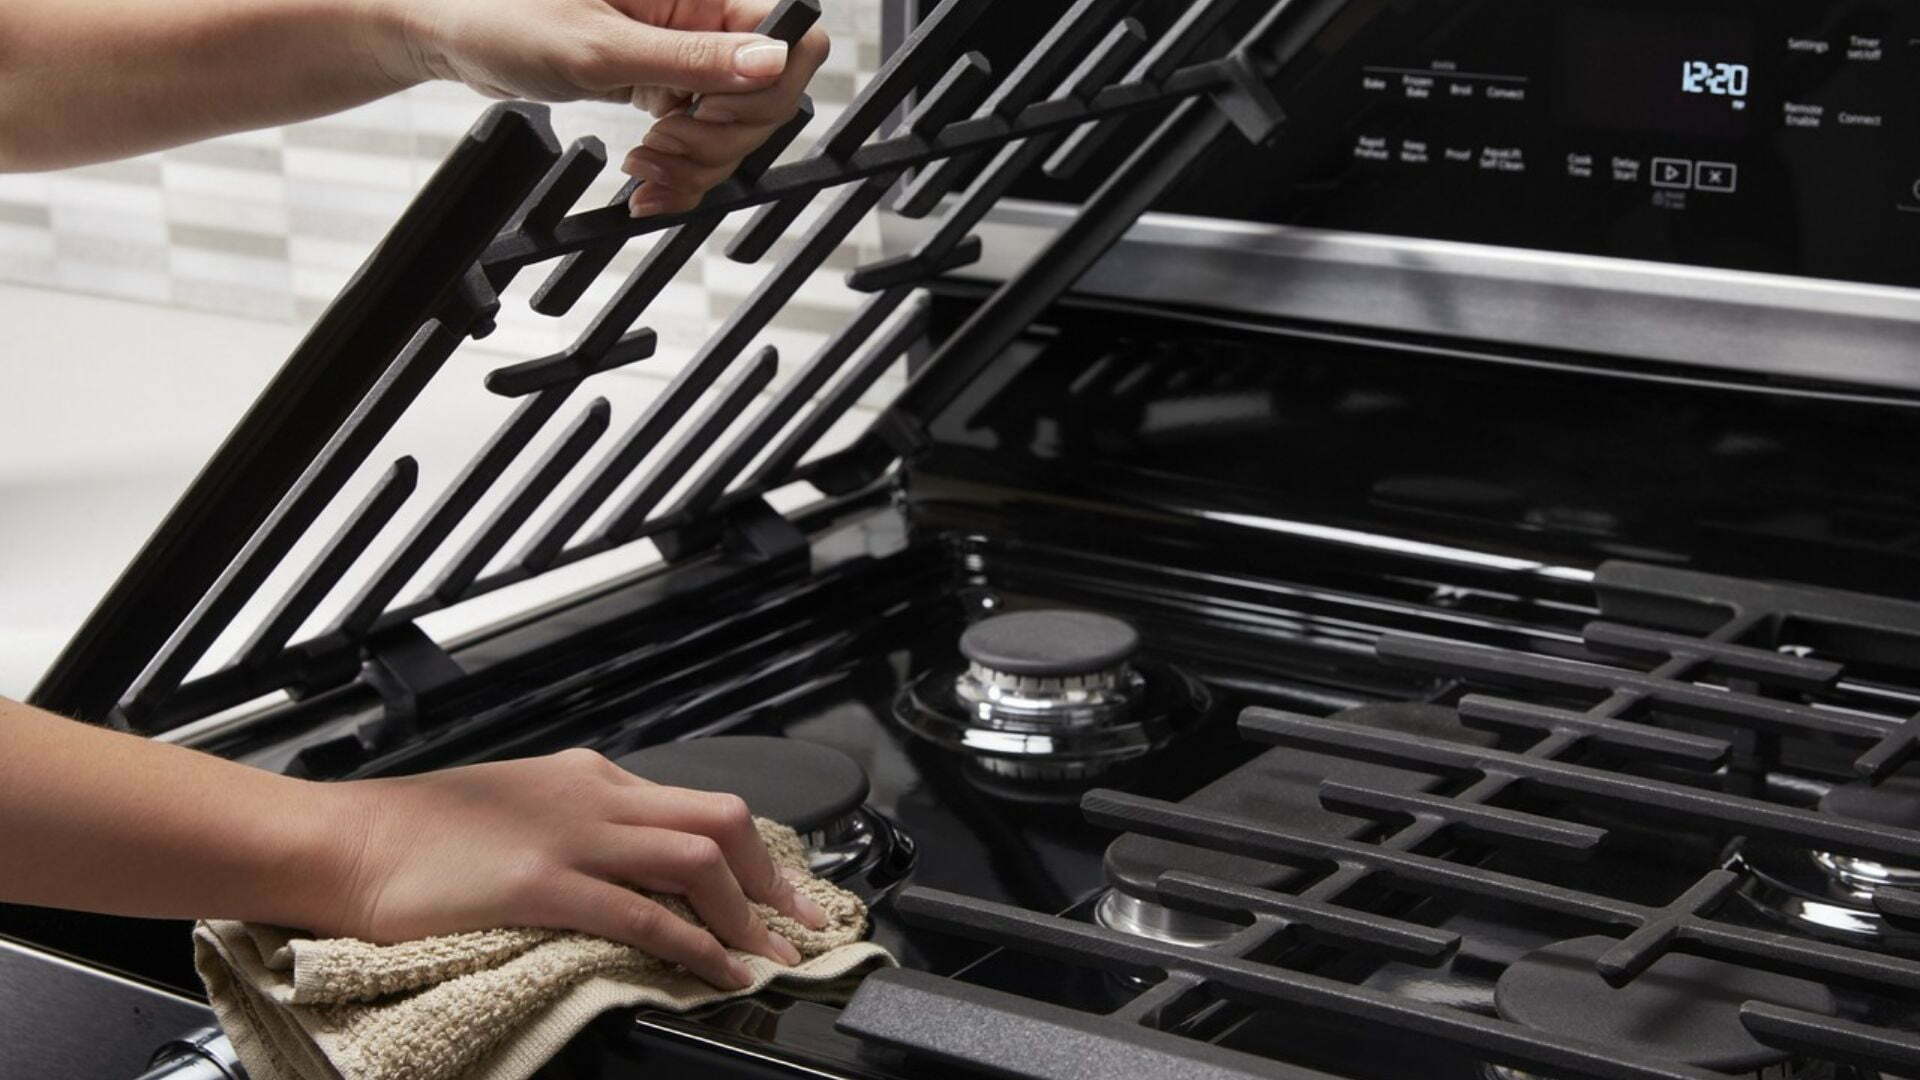 The ULTIMATE Guide To Cleaning Your Stove Burners